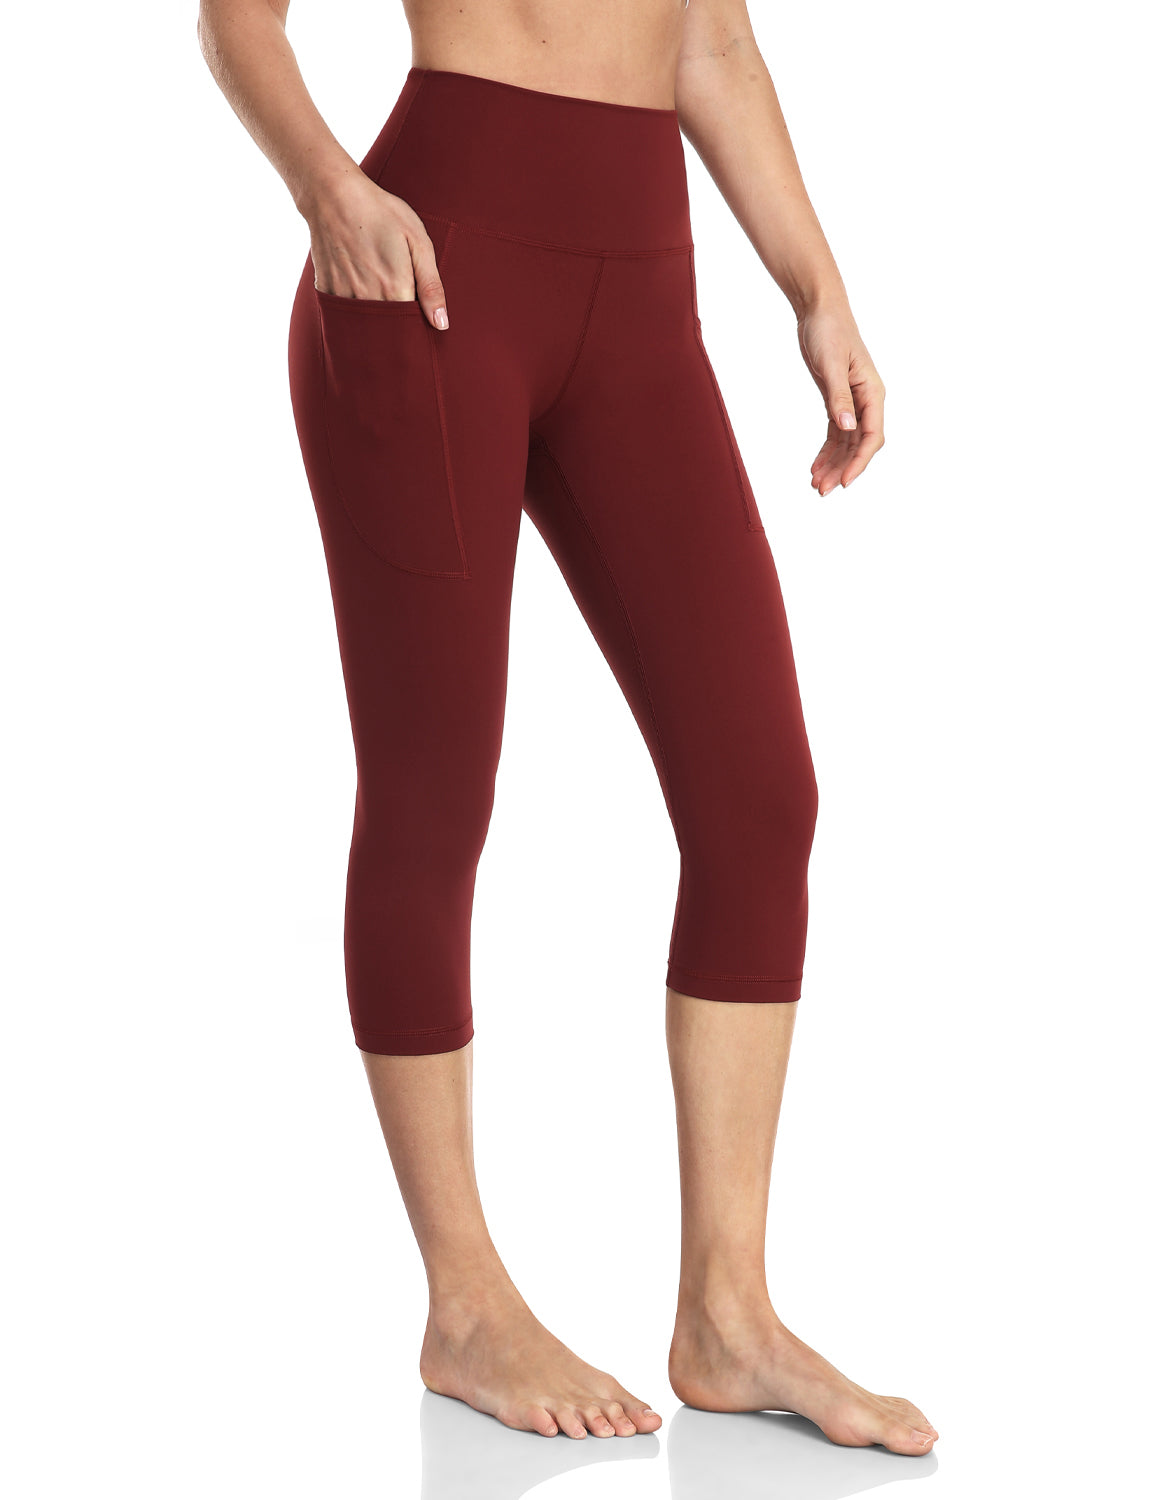 HeyNuts Essential High Waisted Yoga Capris Leggings, Tummy Control Workout  Cropped Pants 21'', Cassis_21'', Small